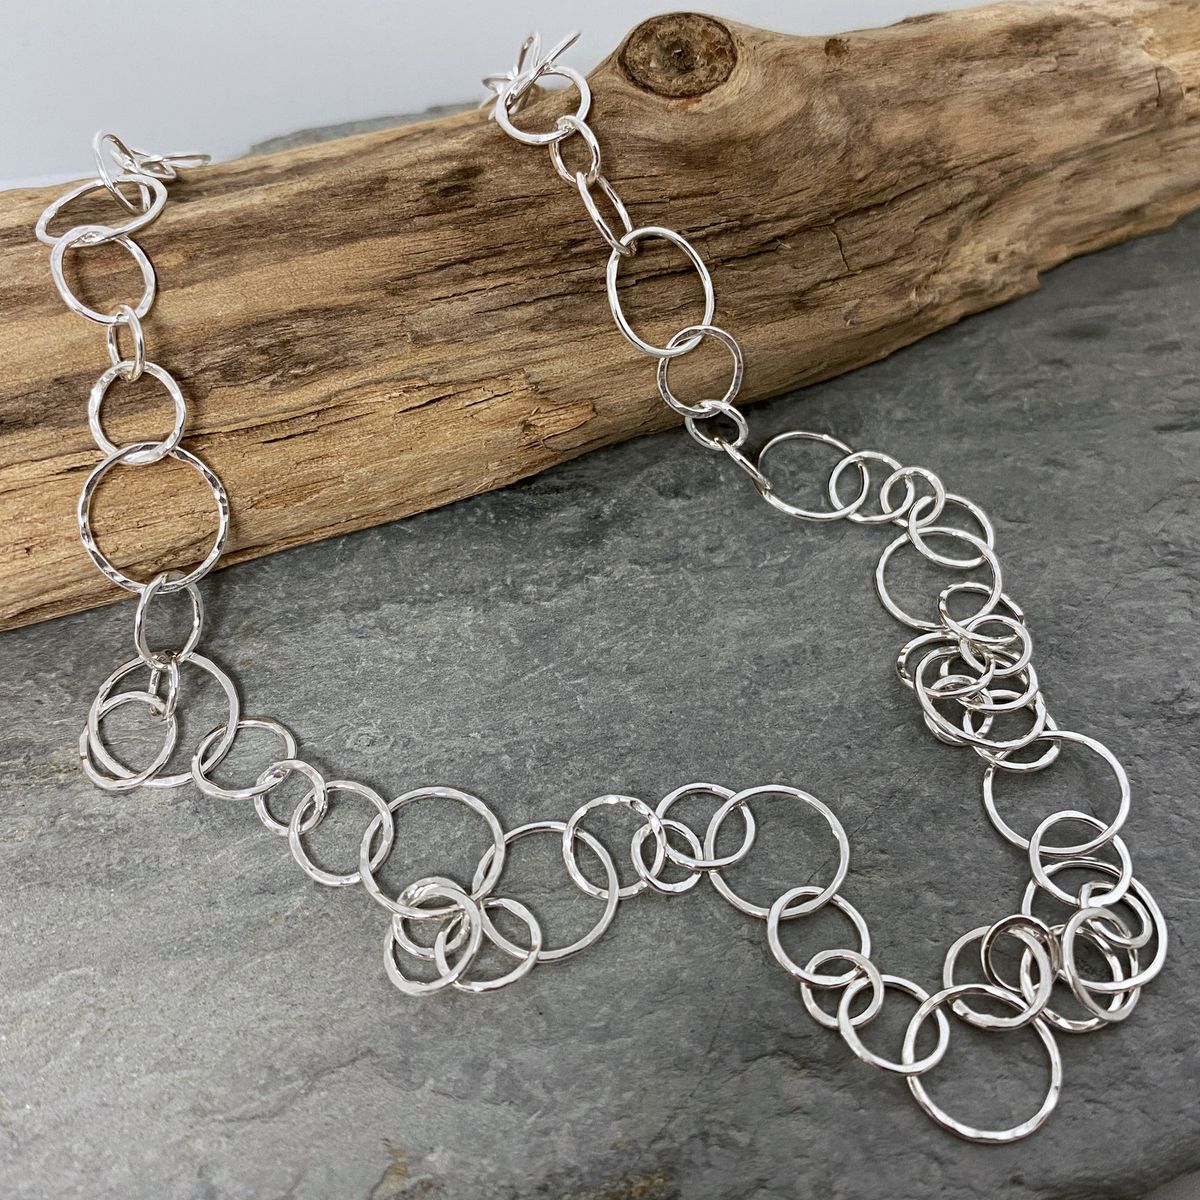 Small links chain necklace